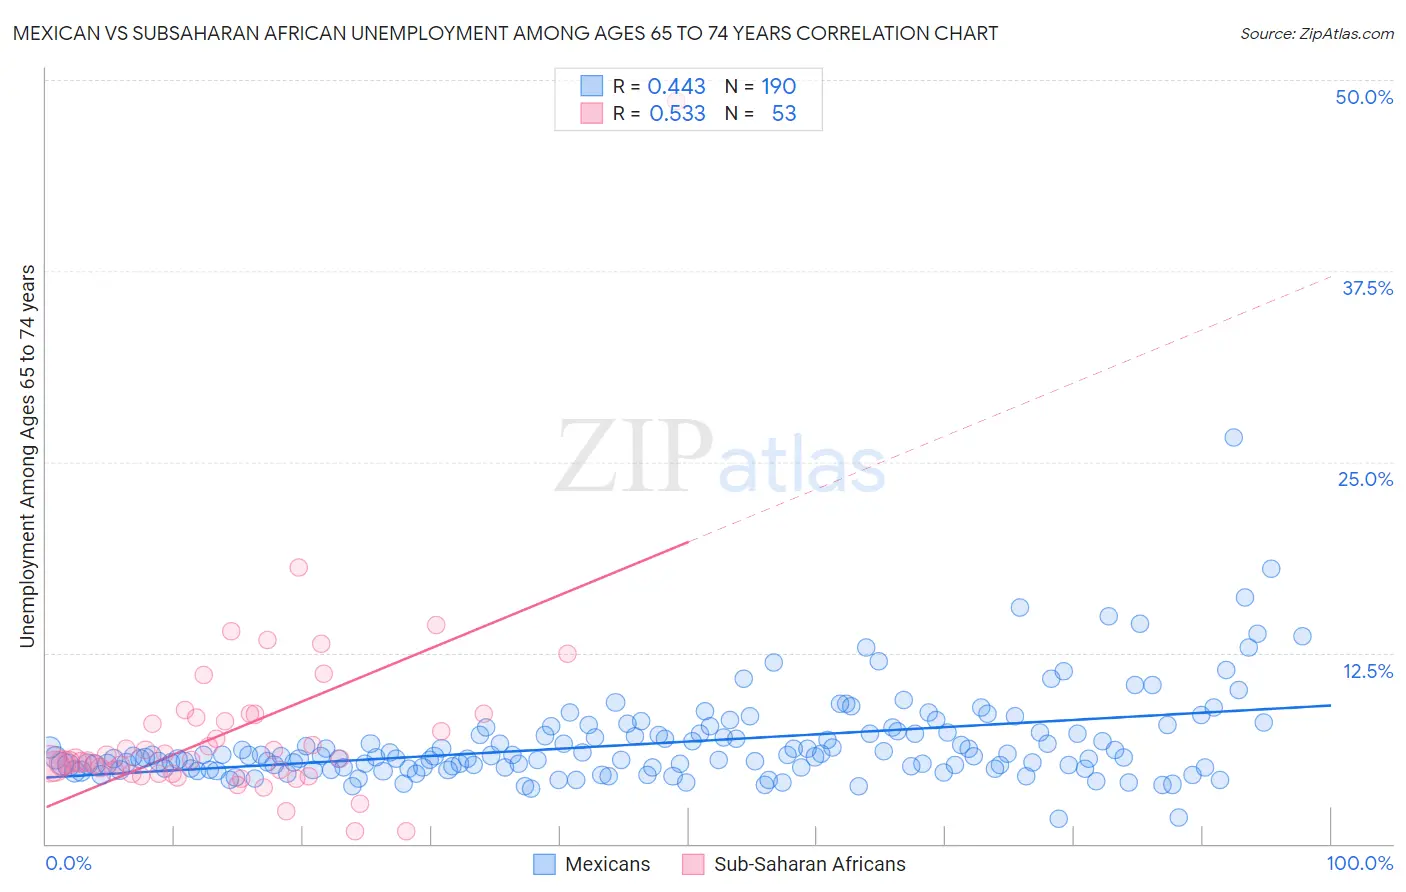 Mexican vs Subsaharan African Unemployment Among Ages 65 to 74 years